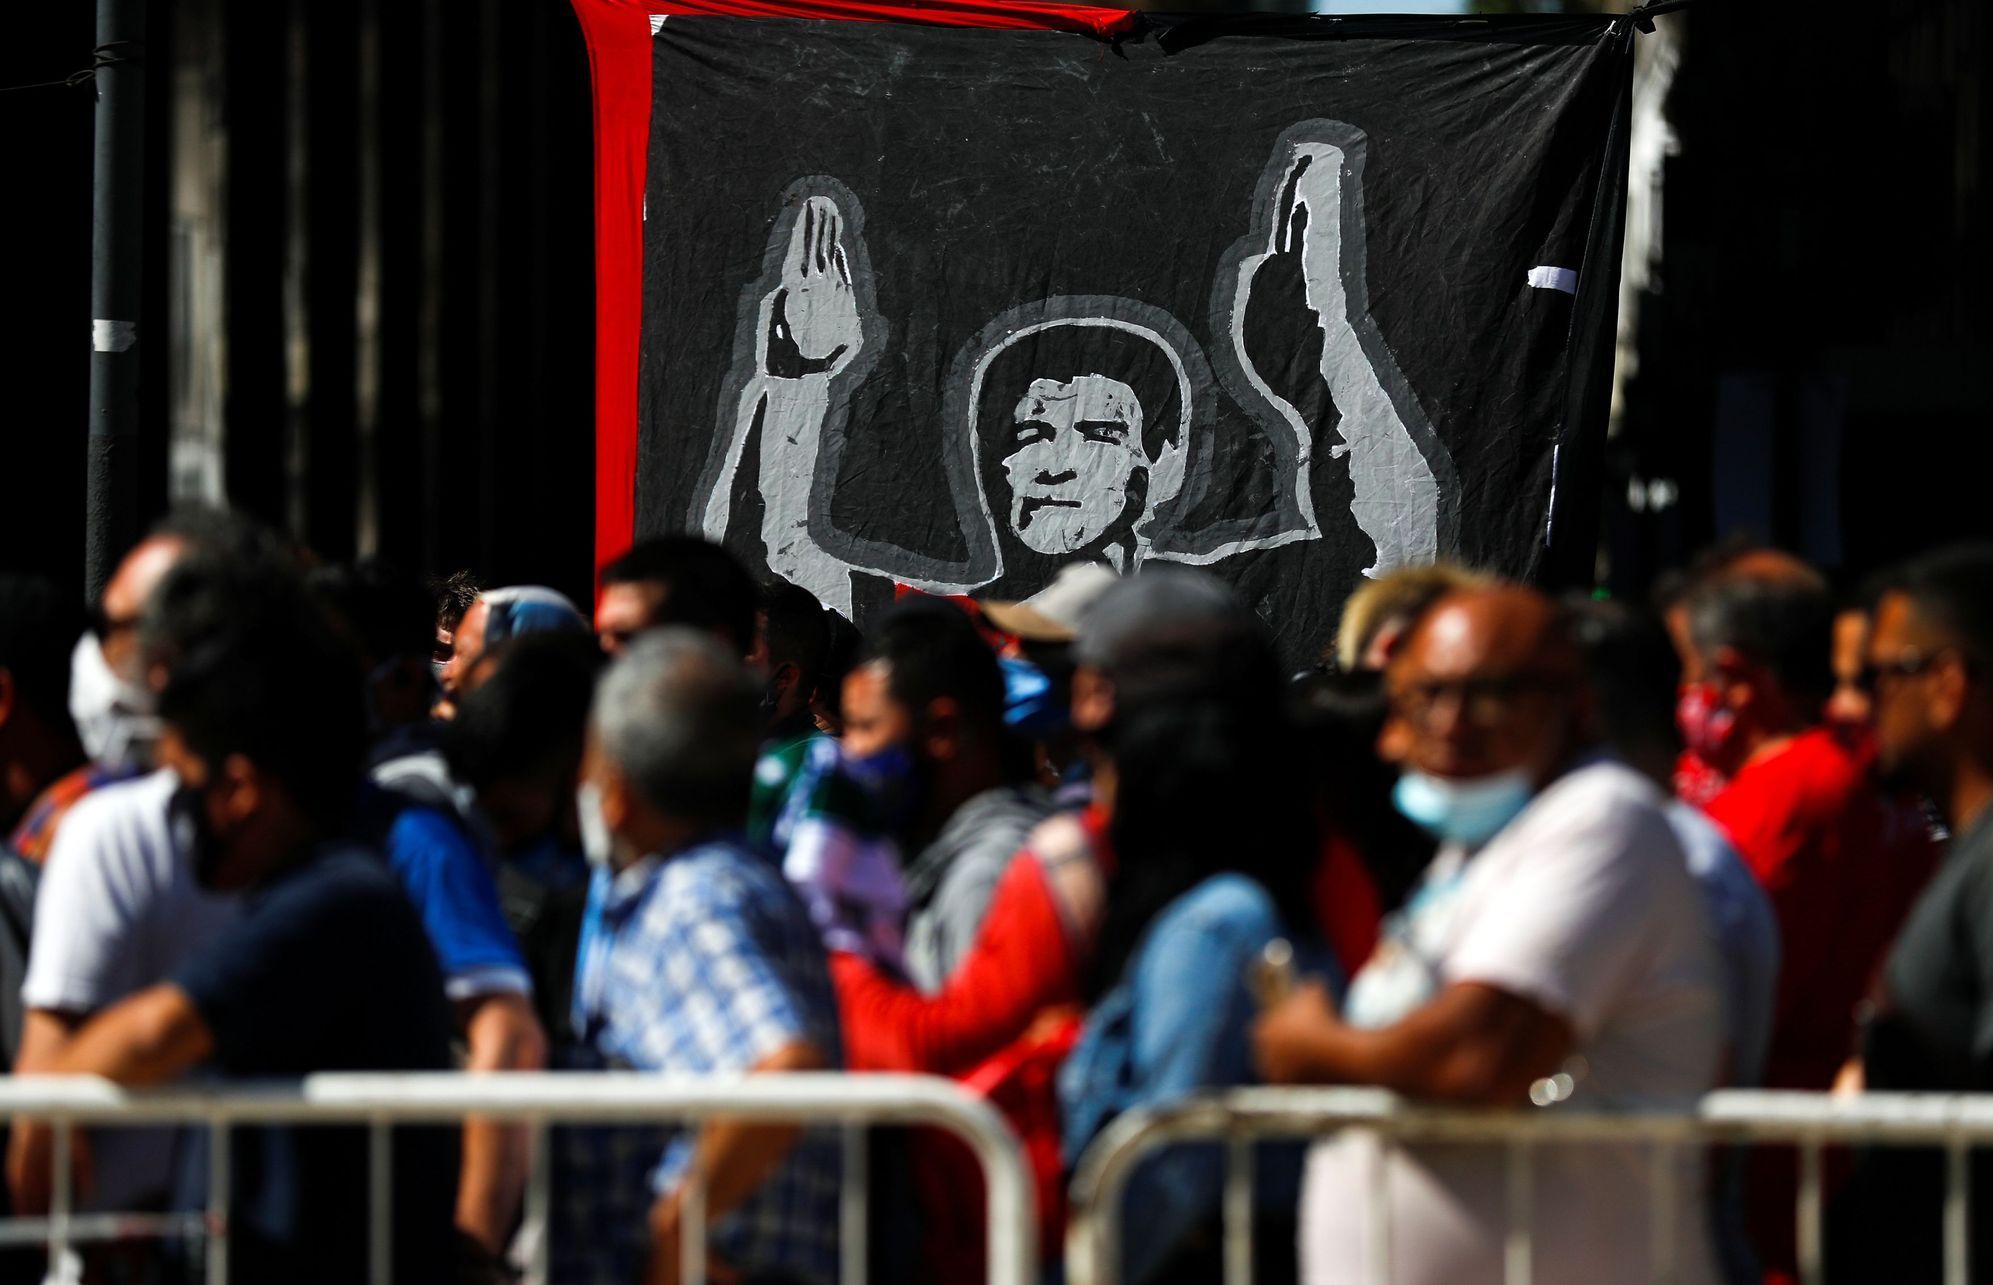 Banner depicting late soccer legend Diego Maradona is pictured outside the Casa Rosada presidential palace, in Buenos Aires